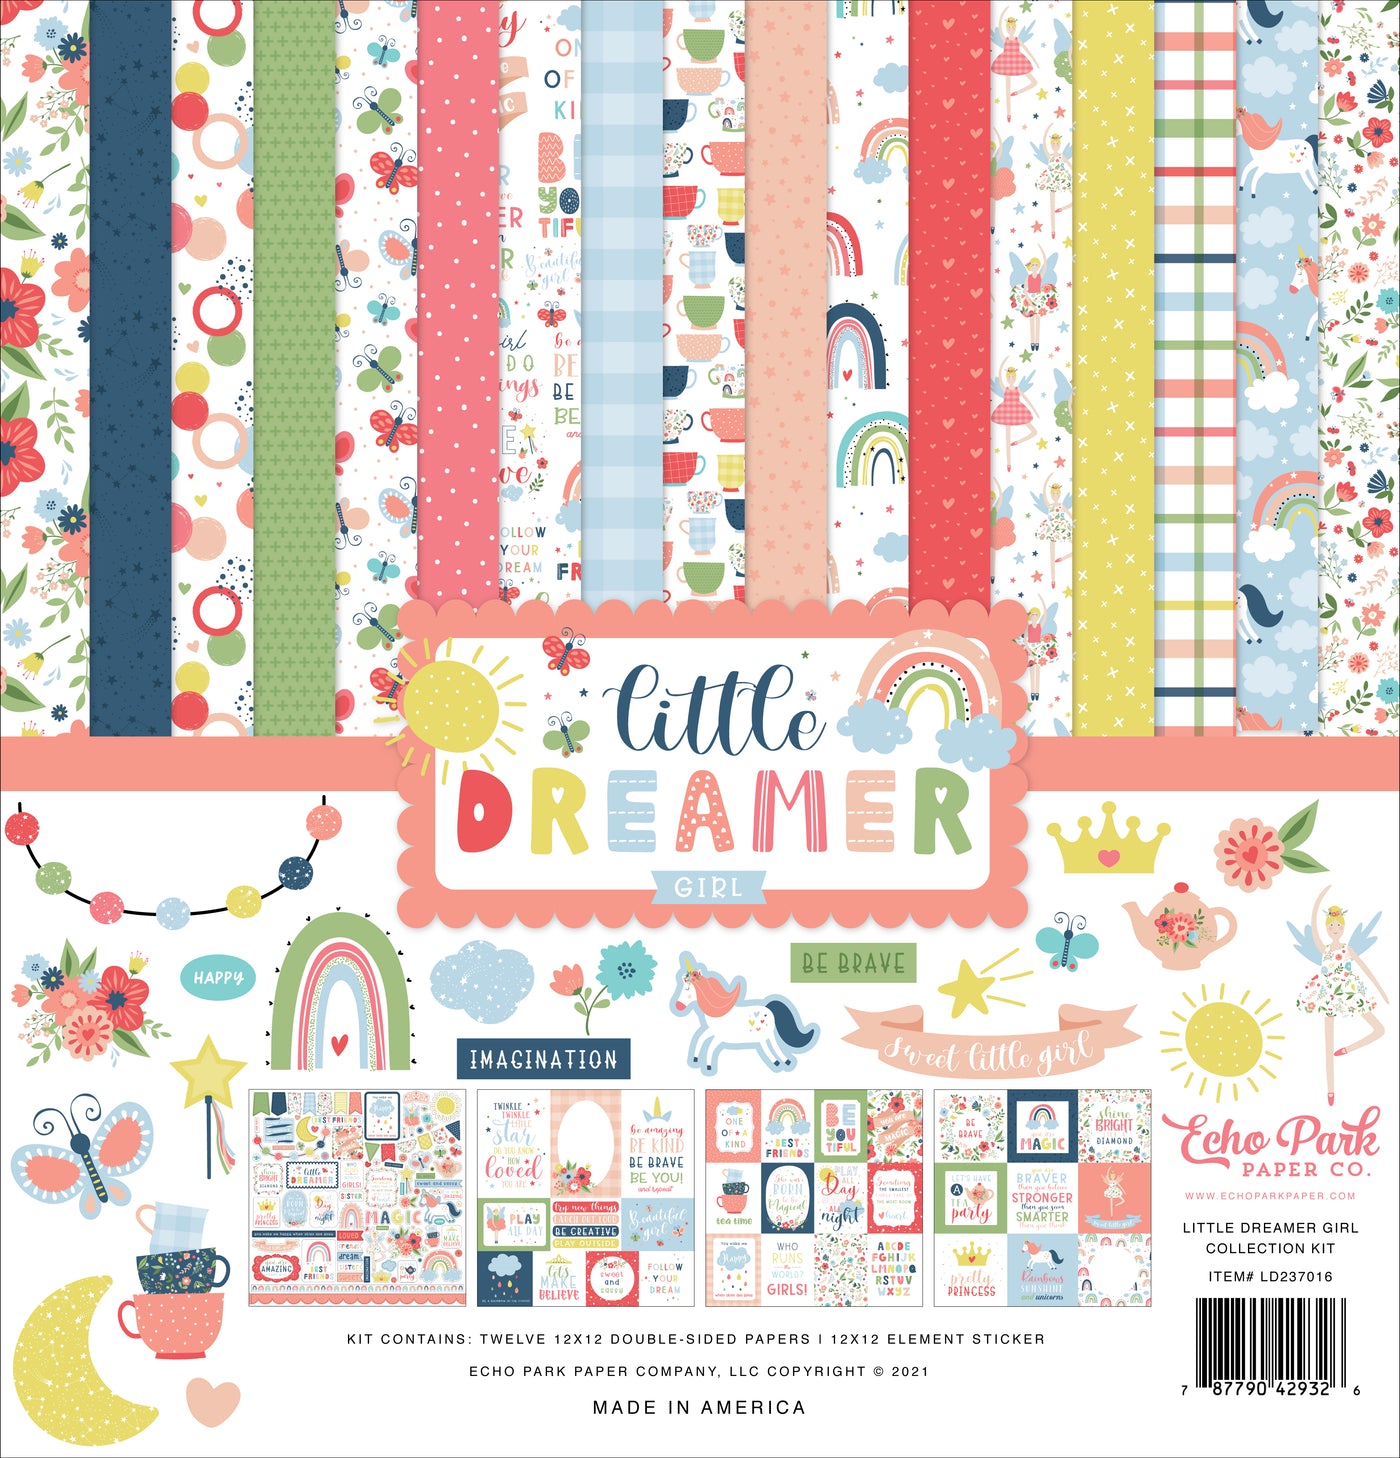 Twelve 12x12 double-sided designer sheets with creative patterns featuring rainbows, unicorns, and a girl's imagination. Archival quality and acid-free.